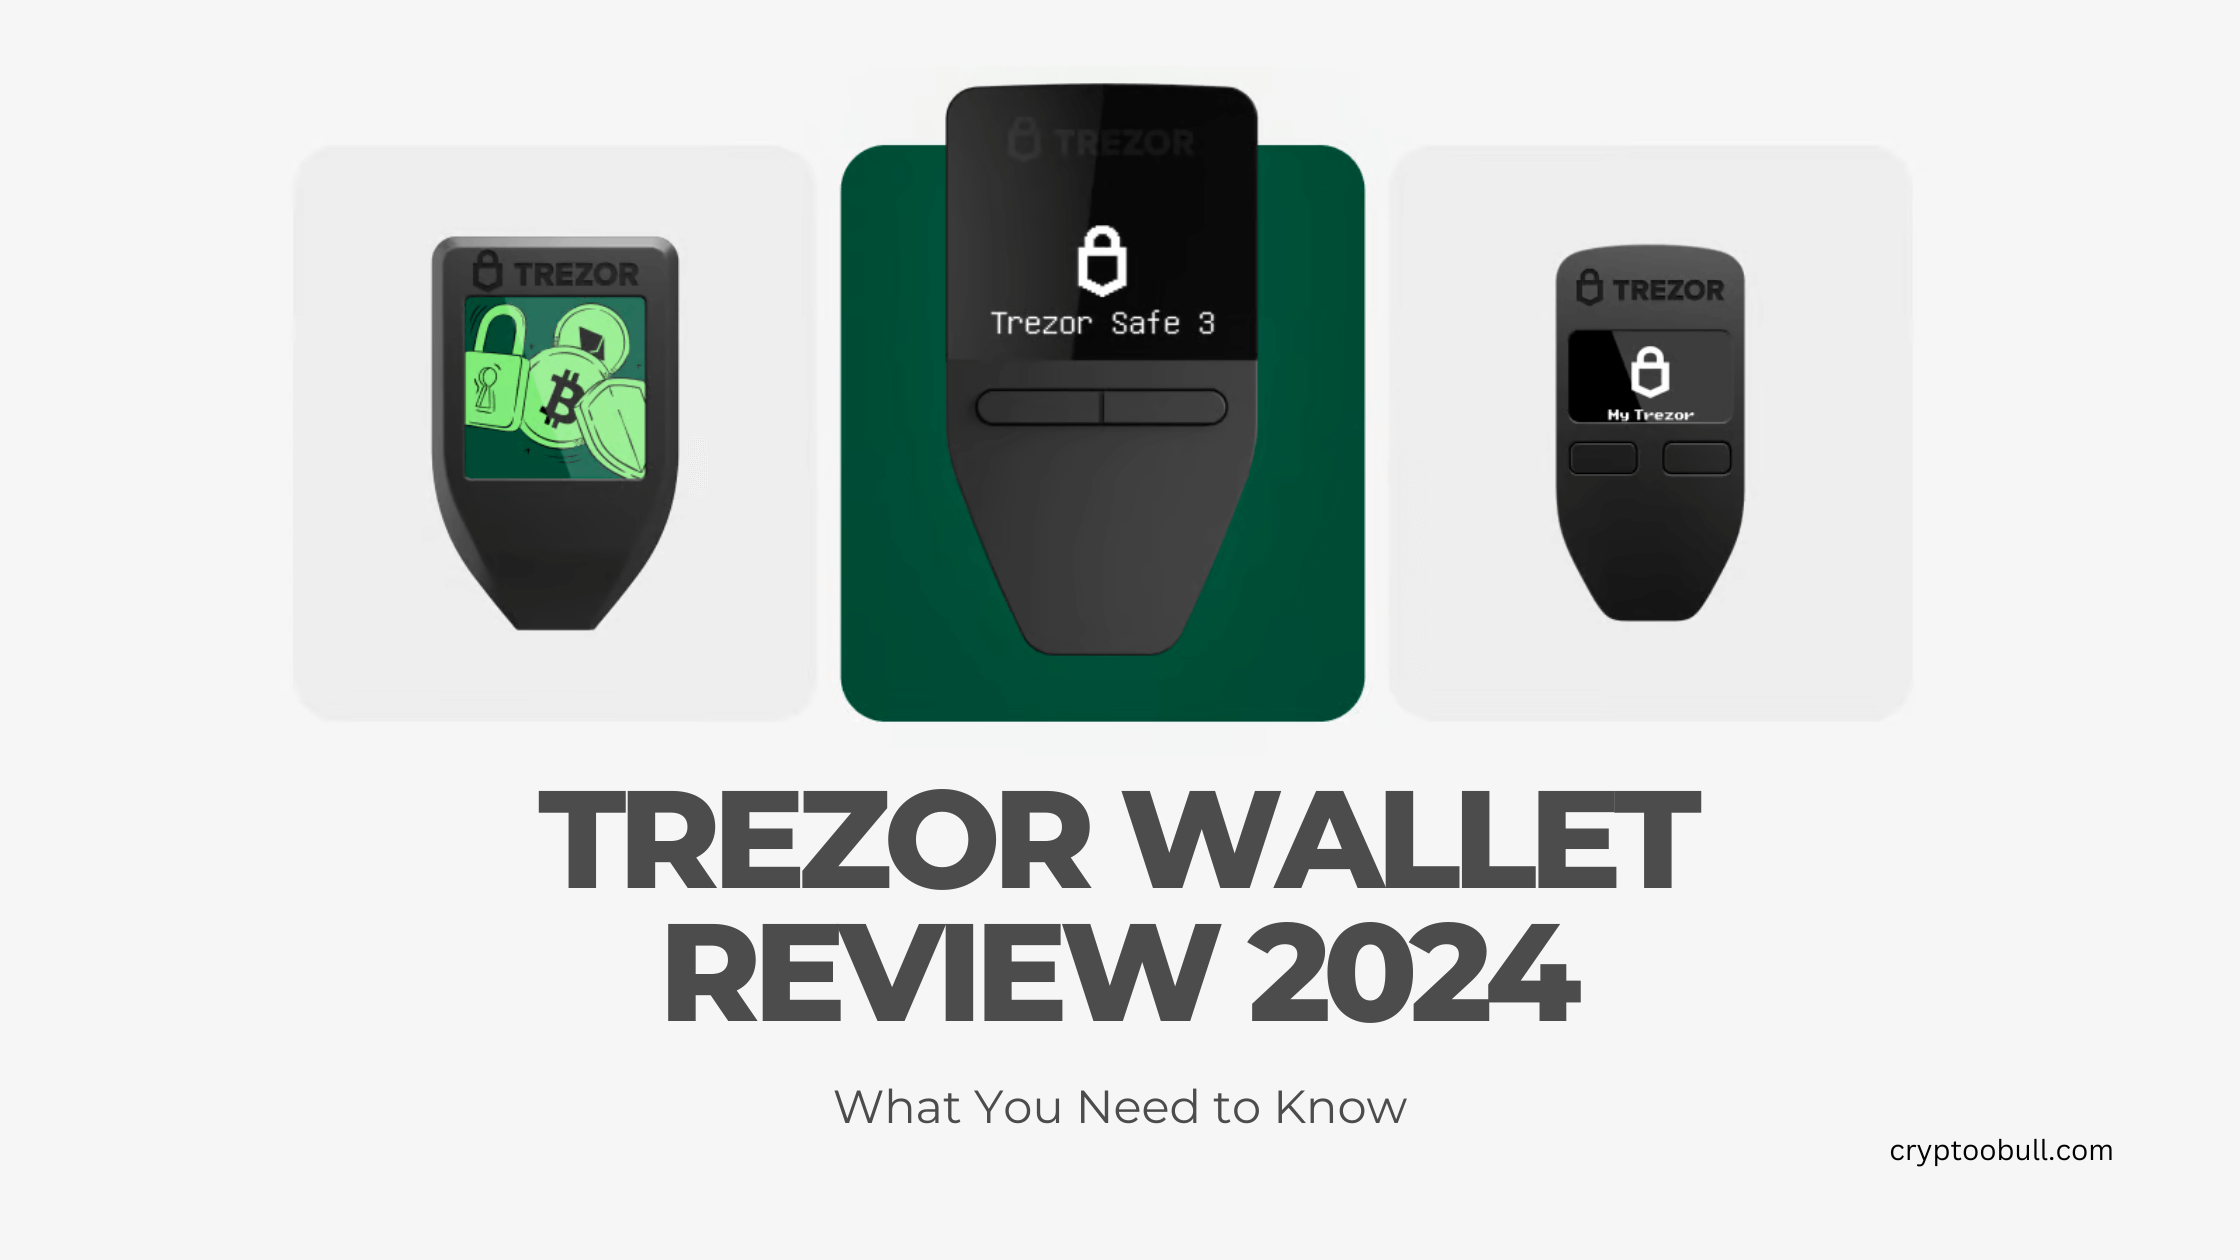 Trezor Wallet Review 2024: What You Need to Know